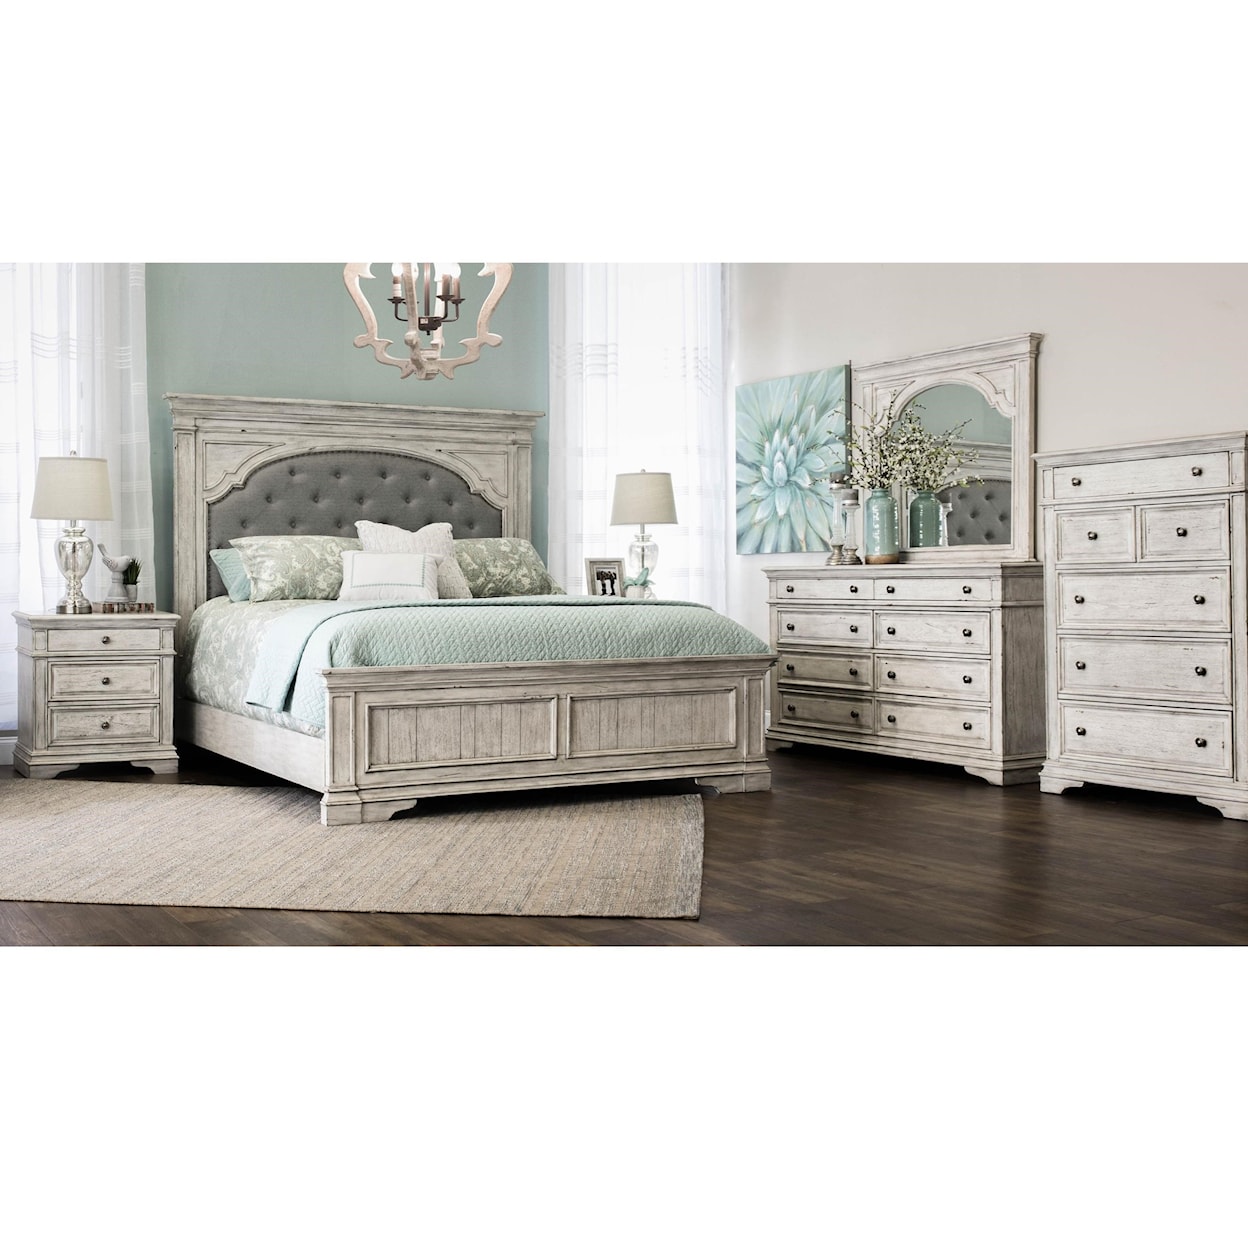 Steve Silver High Point HIGH POINT WHITE QUEEN BED |